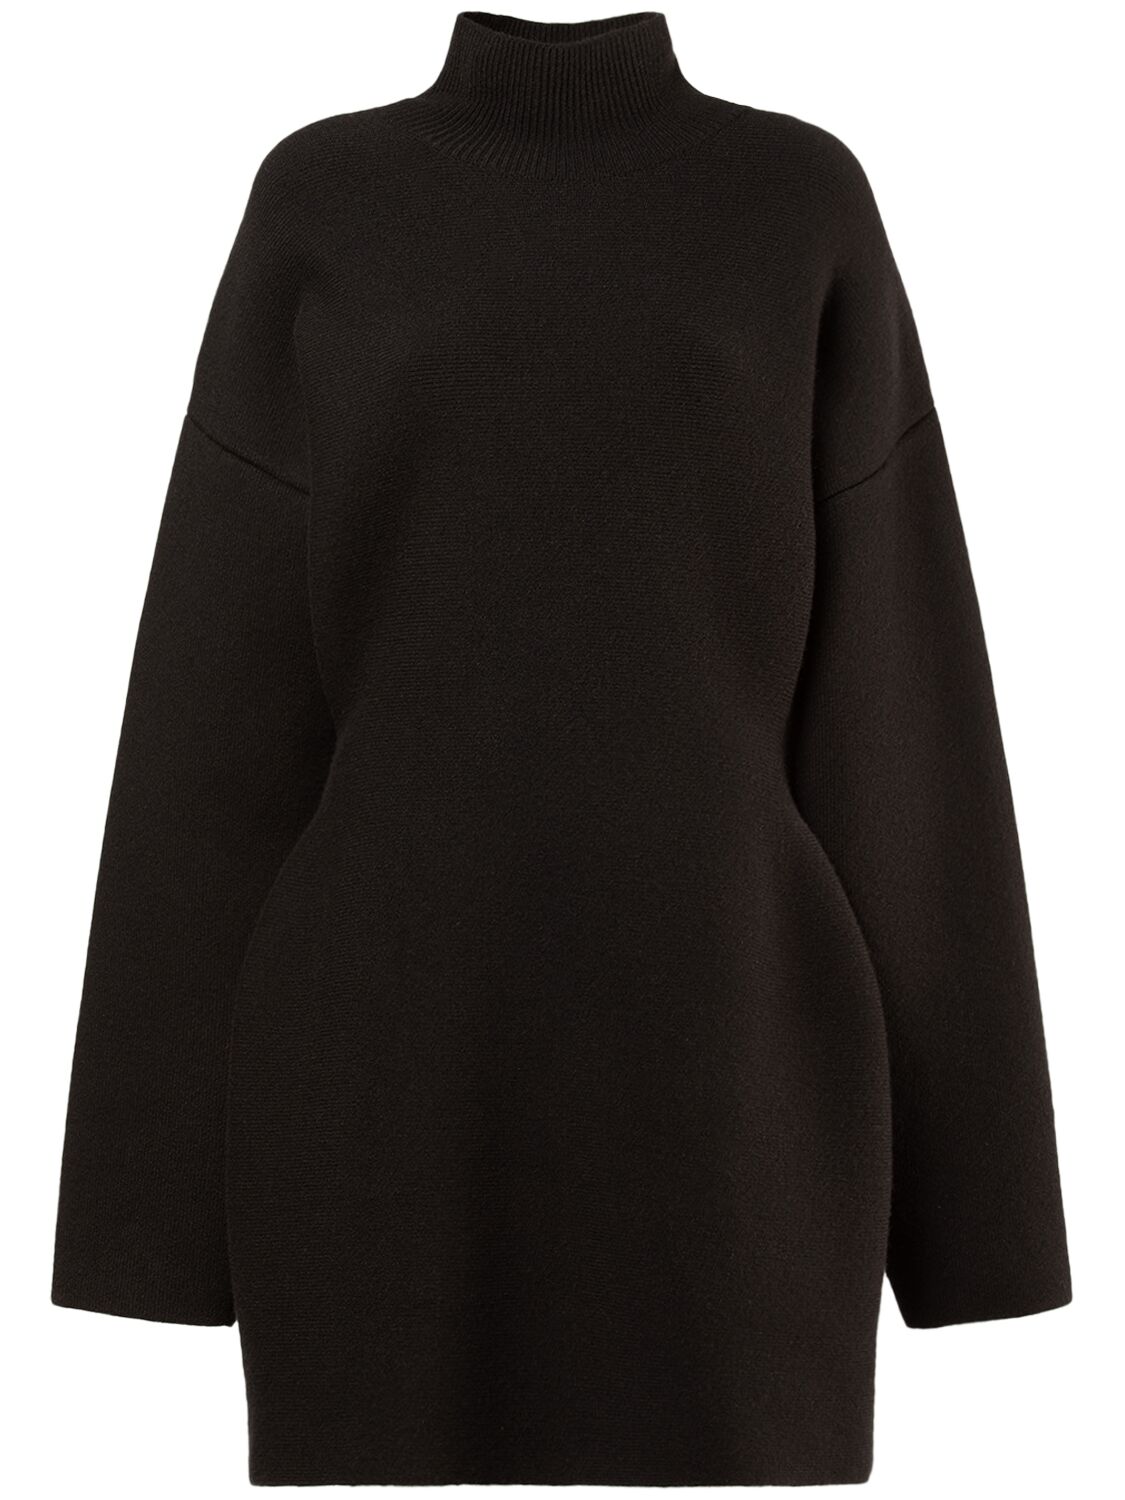 Image of Hourglass Cashmere Blend Sweater